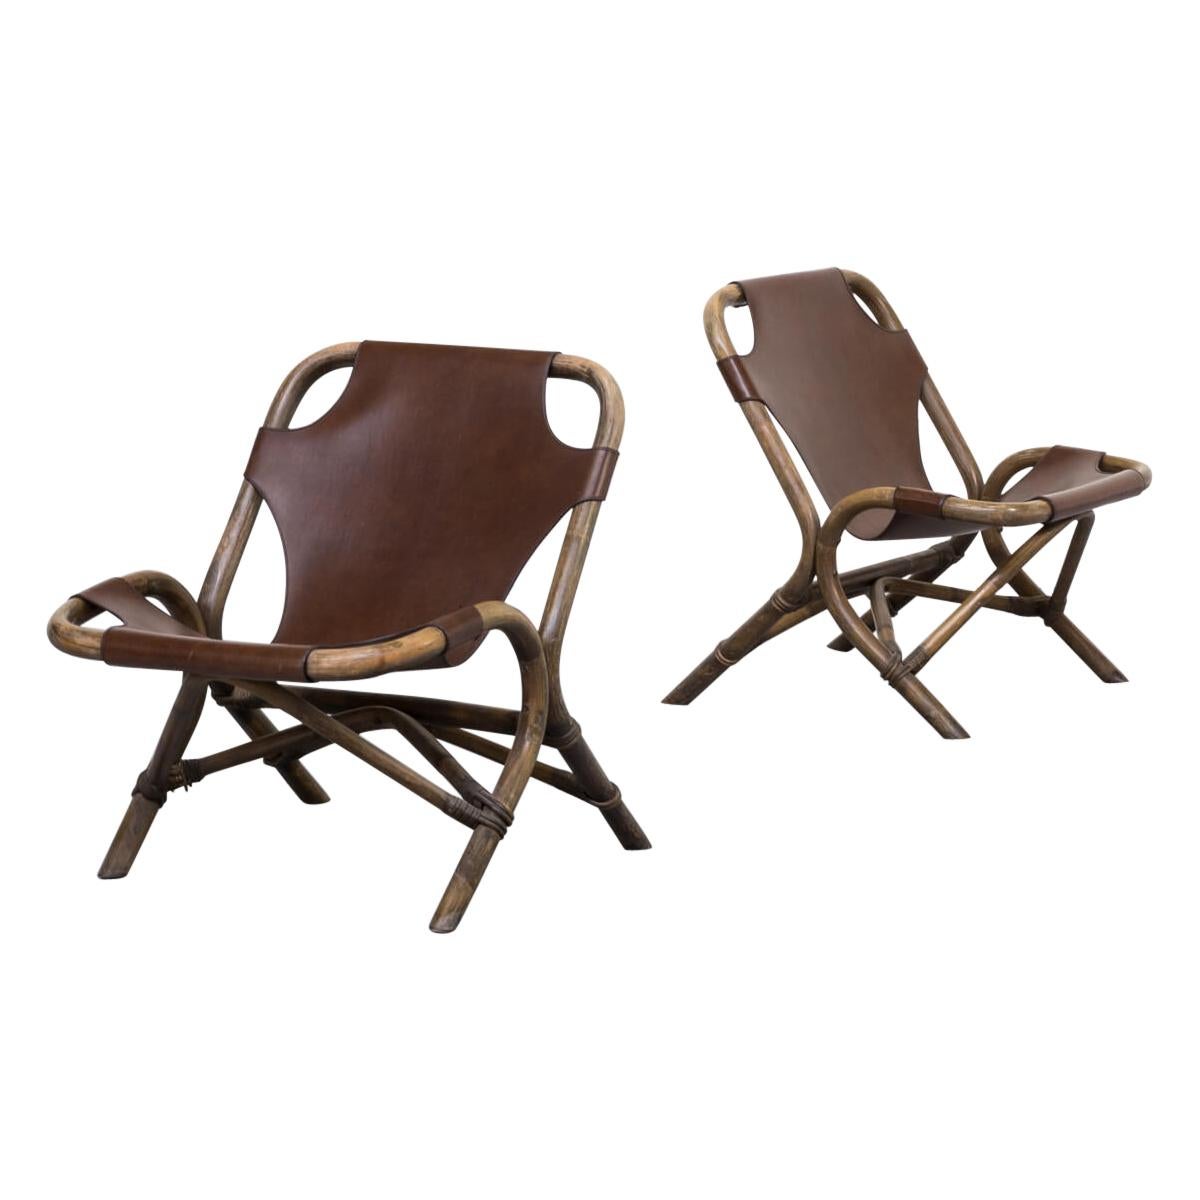 1980s Skai Leather Lounge Chairs, Bamboo Frame For Sale